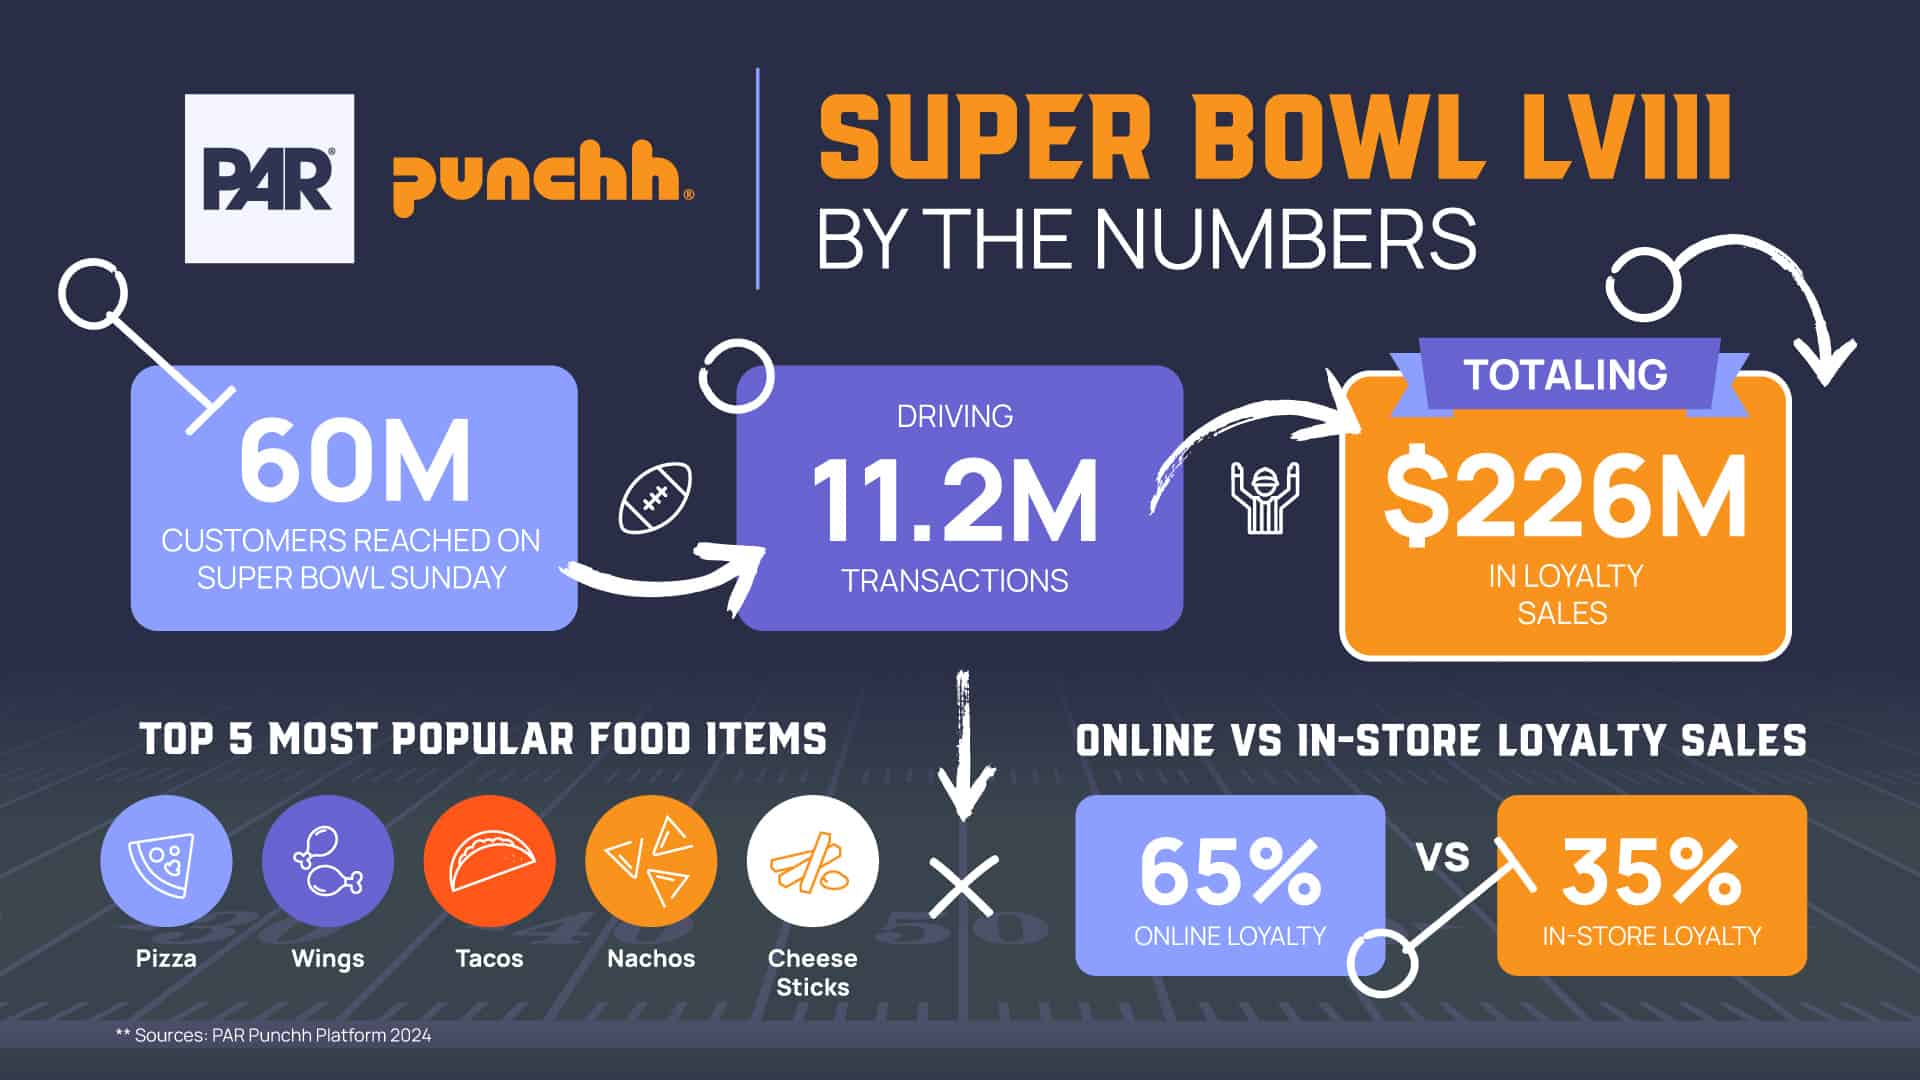 Super Bowl LVIII by the Numbers